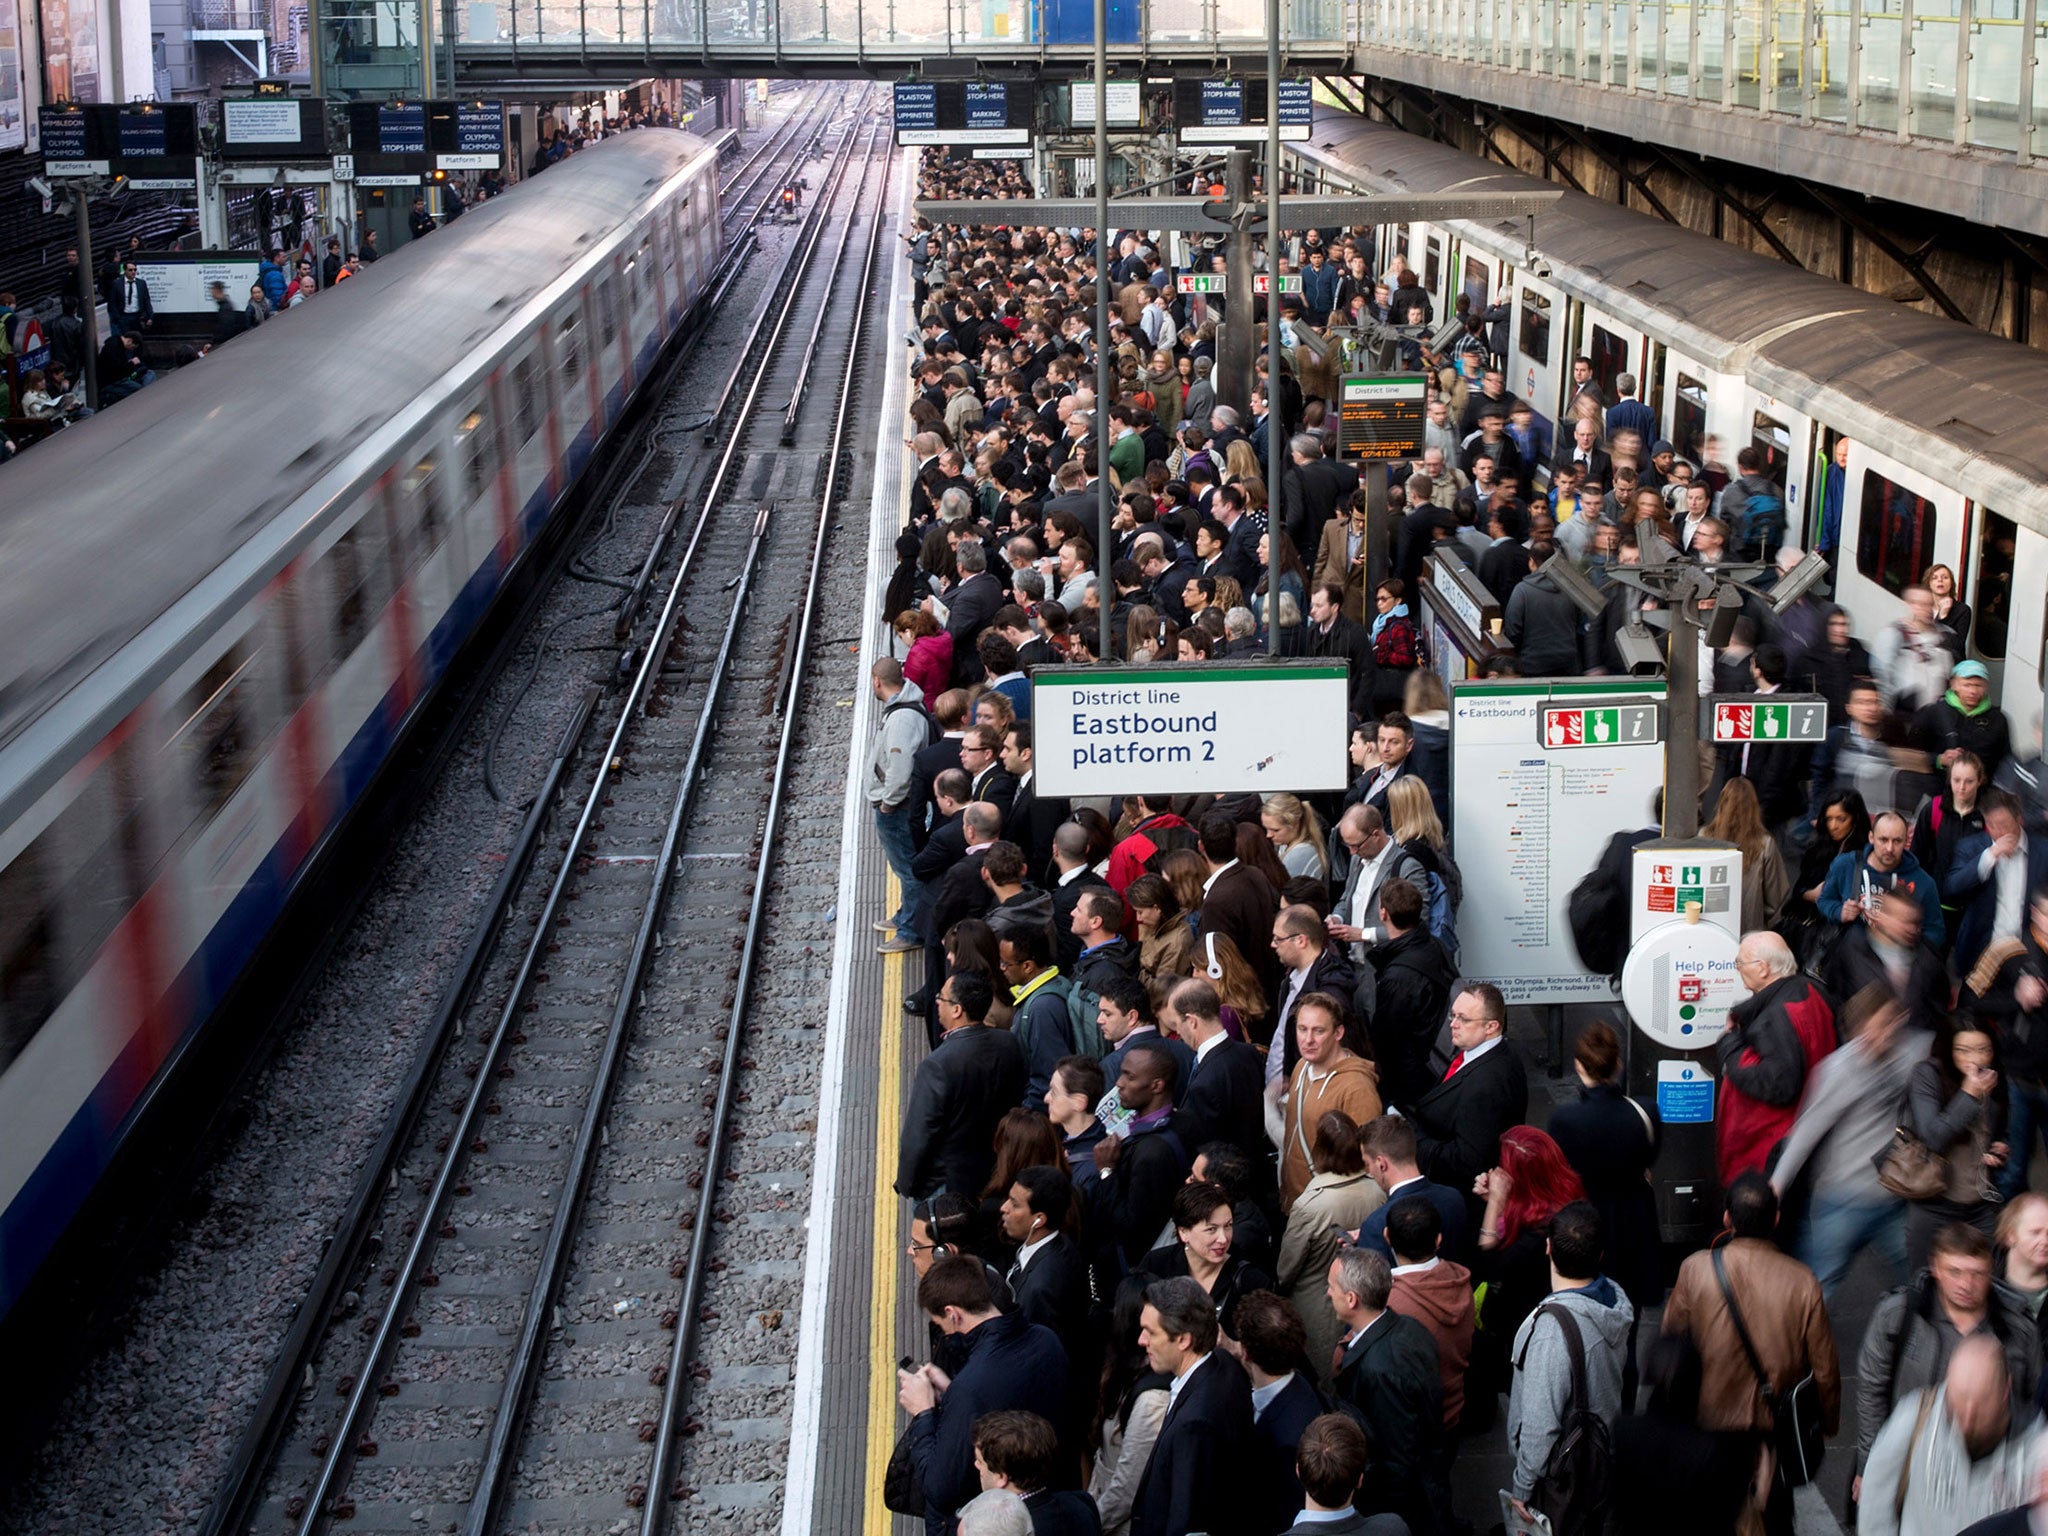 Commuters prepare to travel on the District Line of the London Underground which is running a limited service due to industrial action on 30 April, 2014 in London